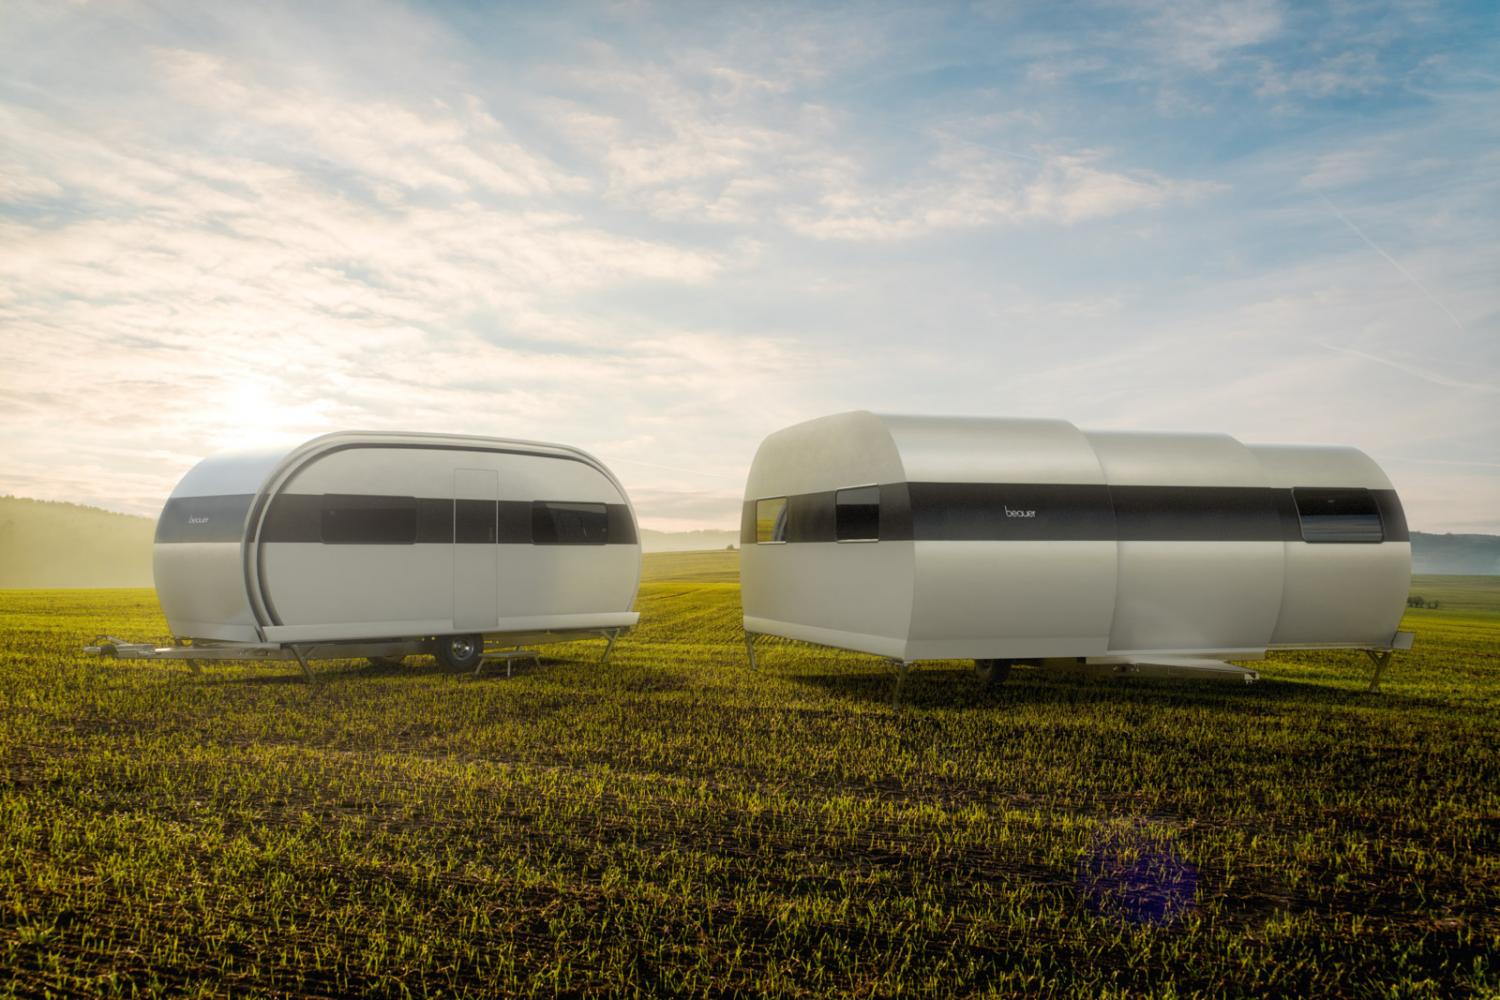 BeauEr 3X Travel Trailer Expands to Triple Its Size In Seconds